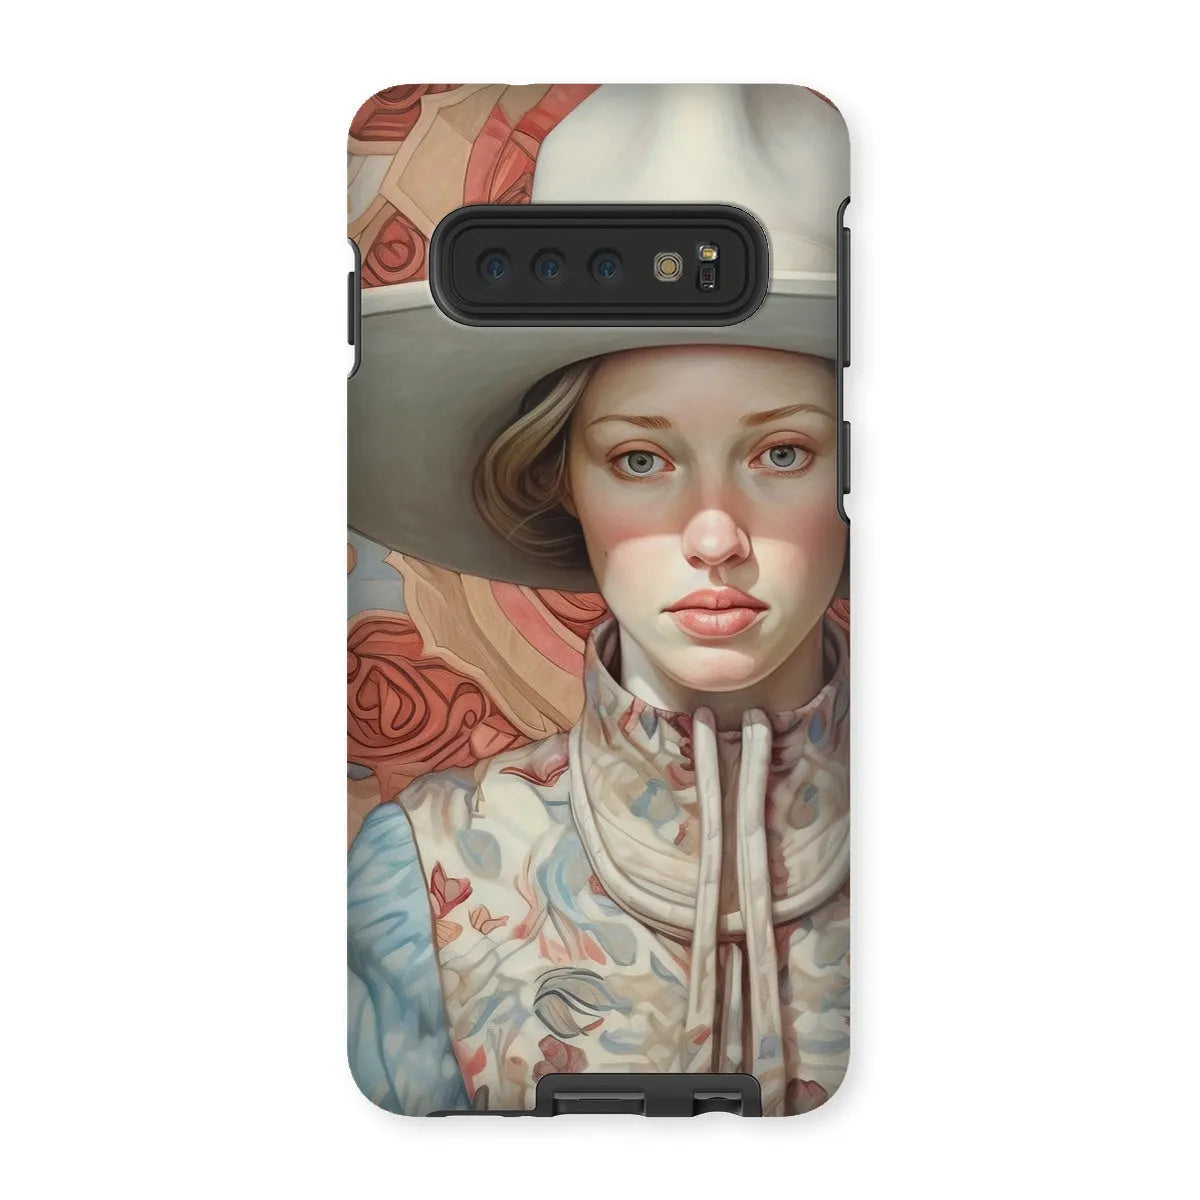 Lottie The Lesbian Cowgirl - Sapphic Art Phone Case - Samsung Galaxy S10 / Matte - Mobile Phone Cases - Aesthetic Art